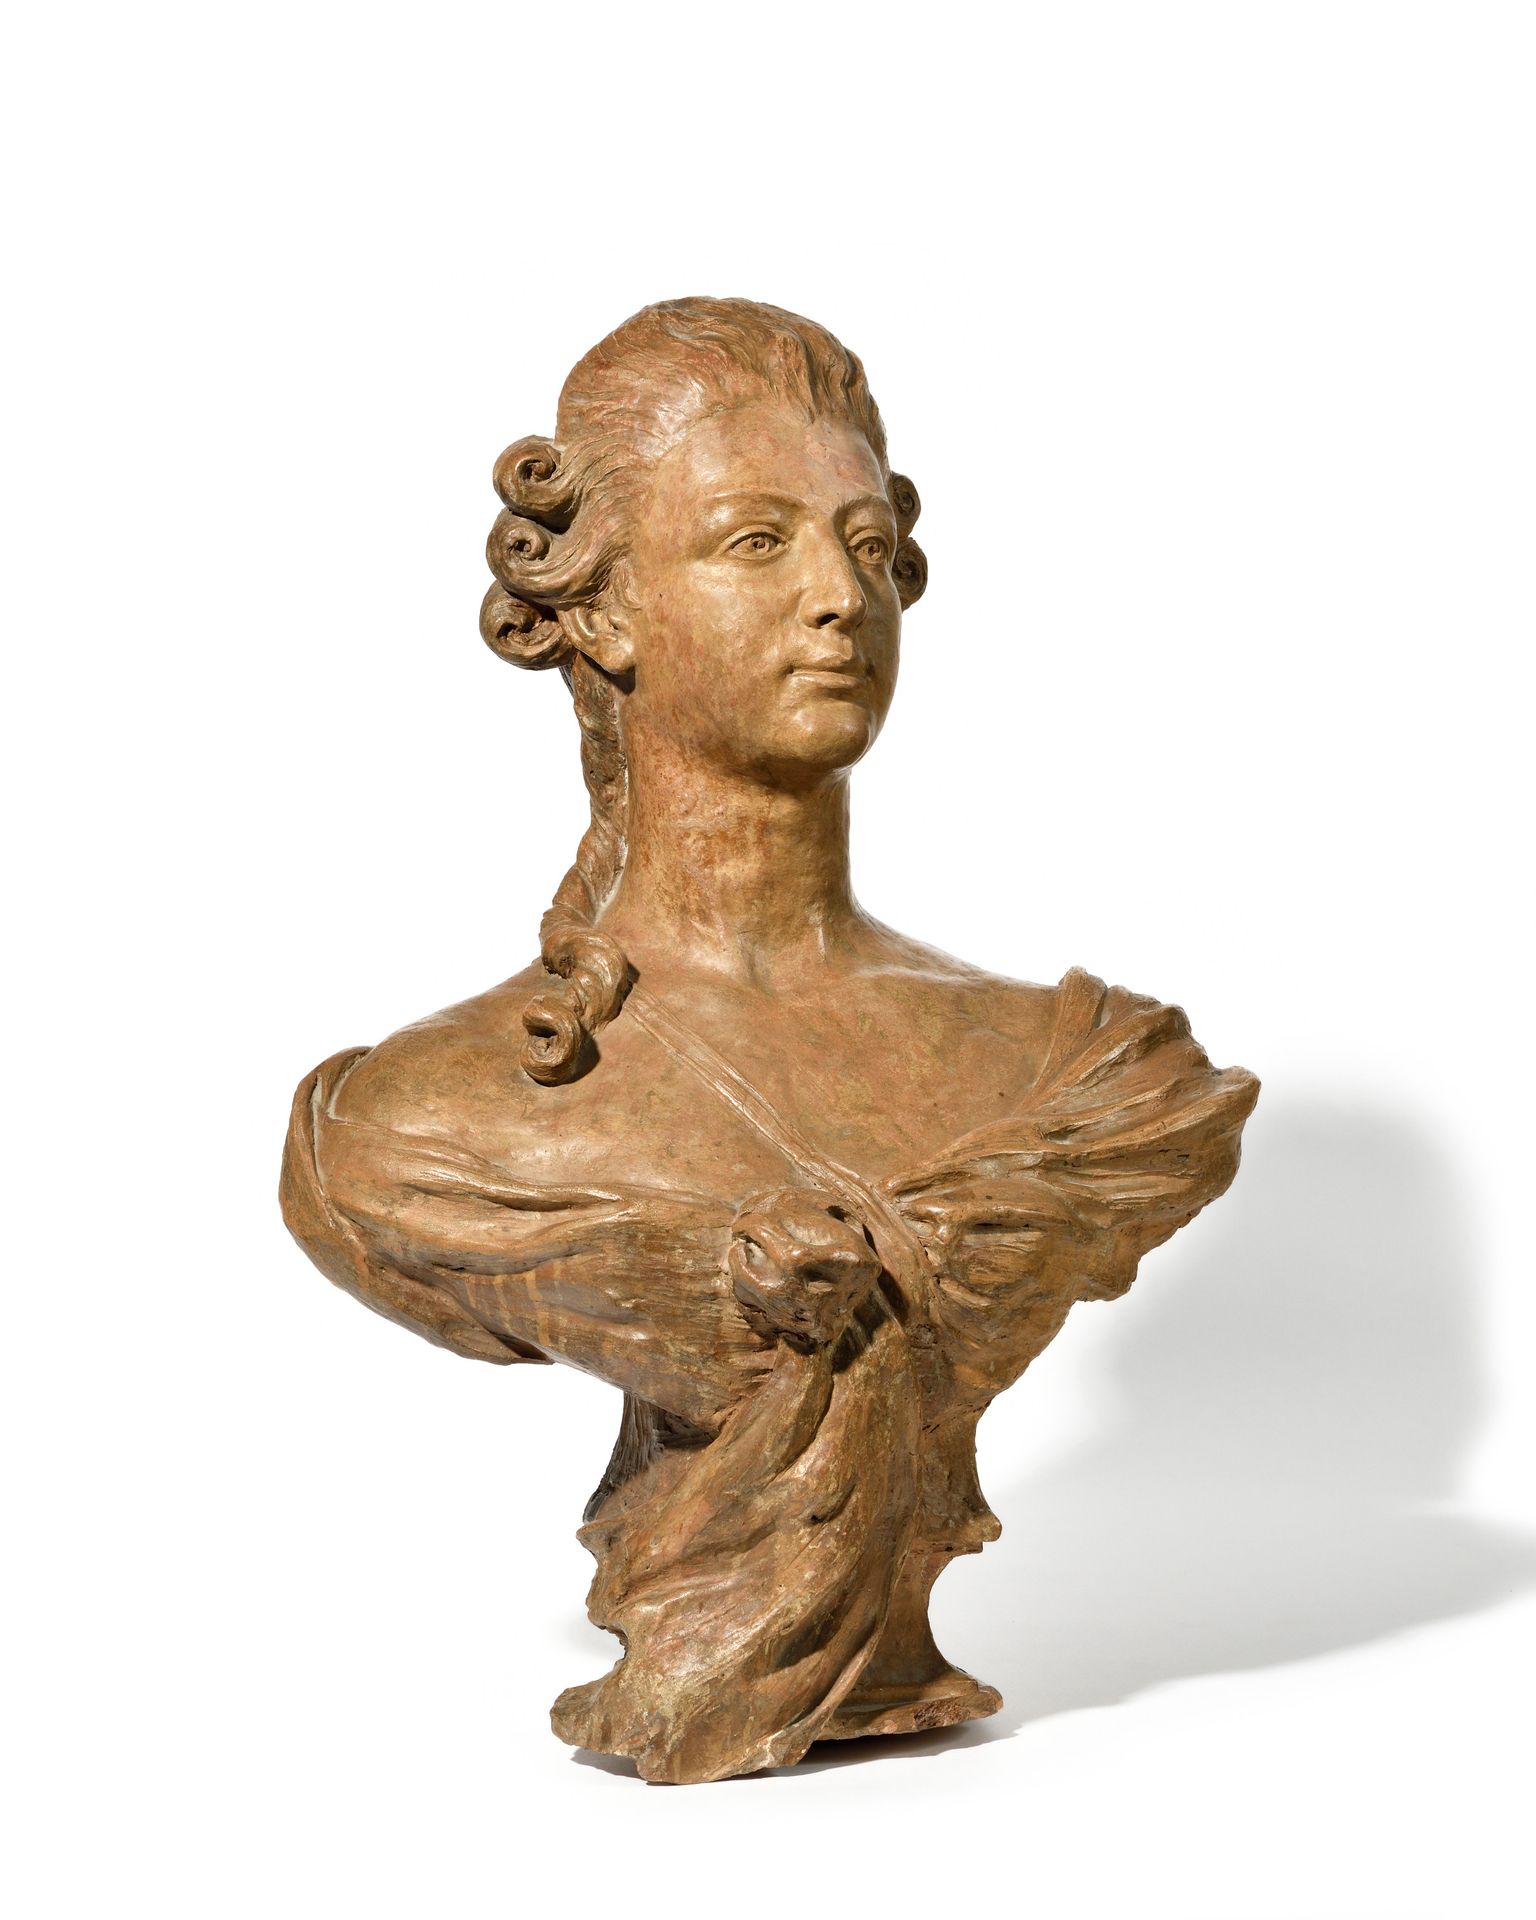 Null 19th-century French school in the 18th-century style
Woman's bust
Patinated&hellip;